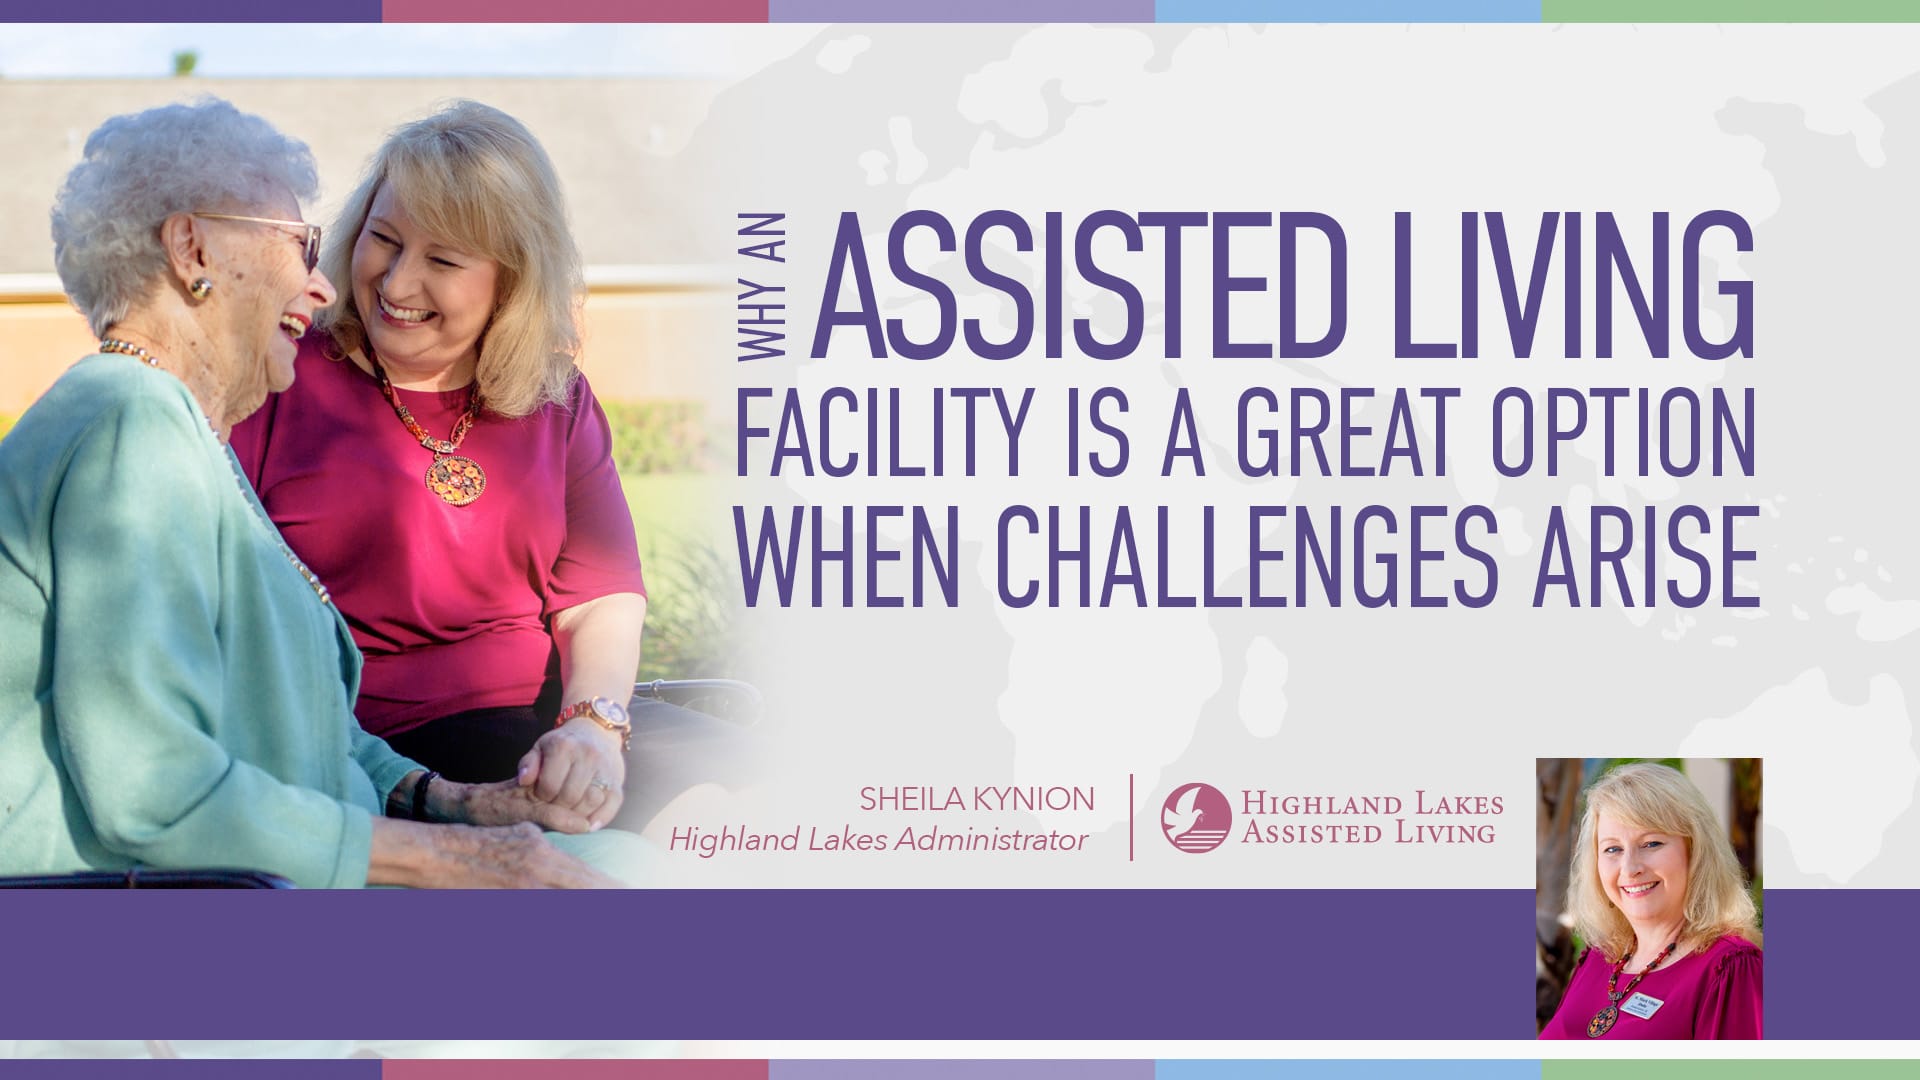 Assisted living facility is a great option for improving quality of life and preparing for a move to a better living environment.